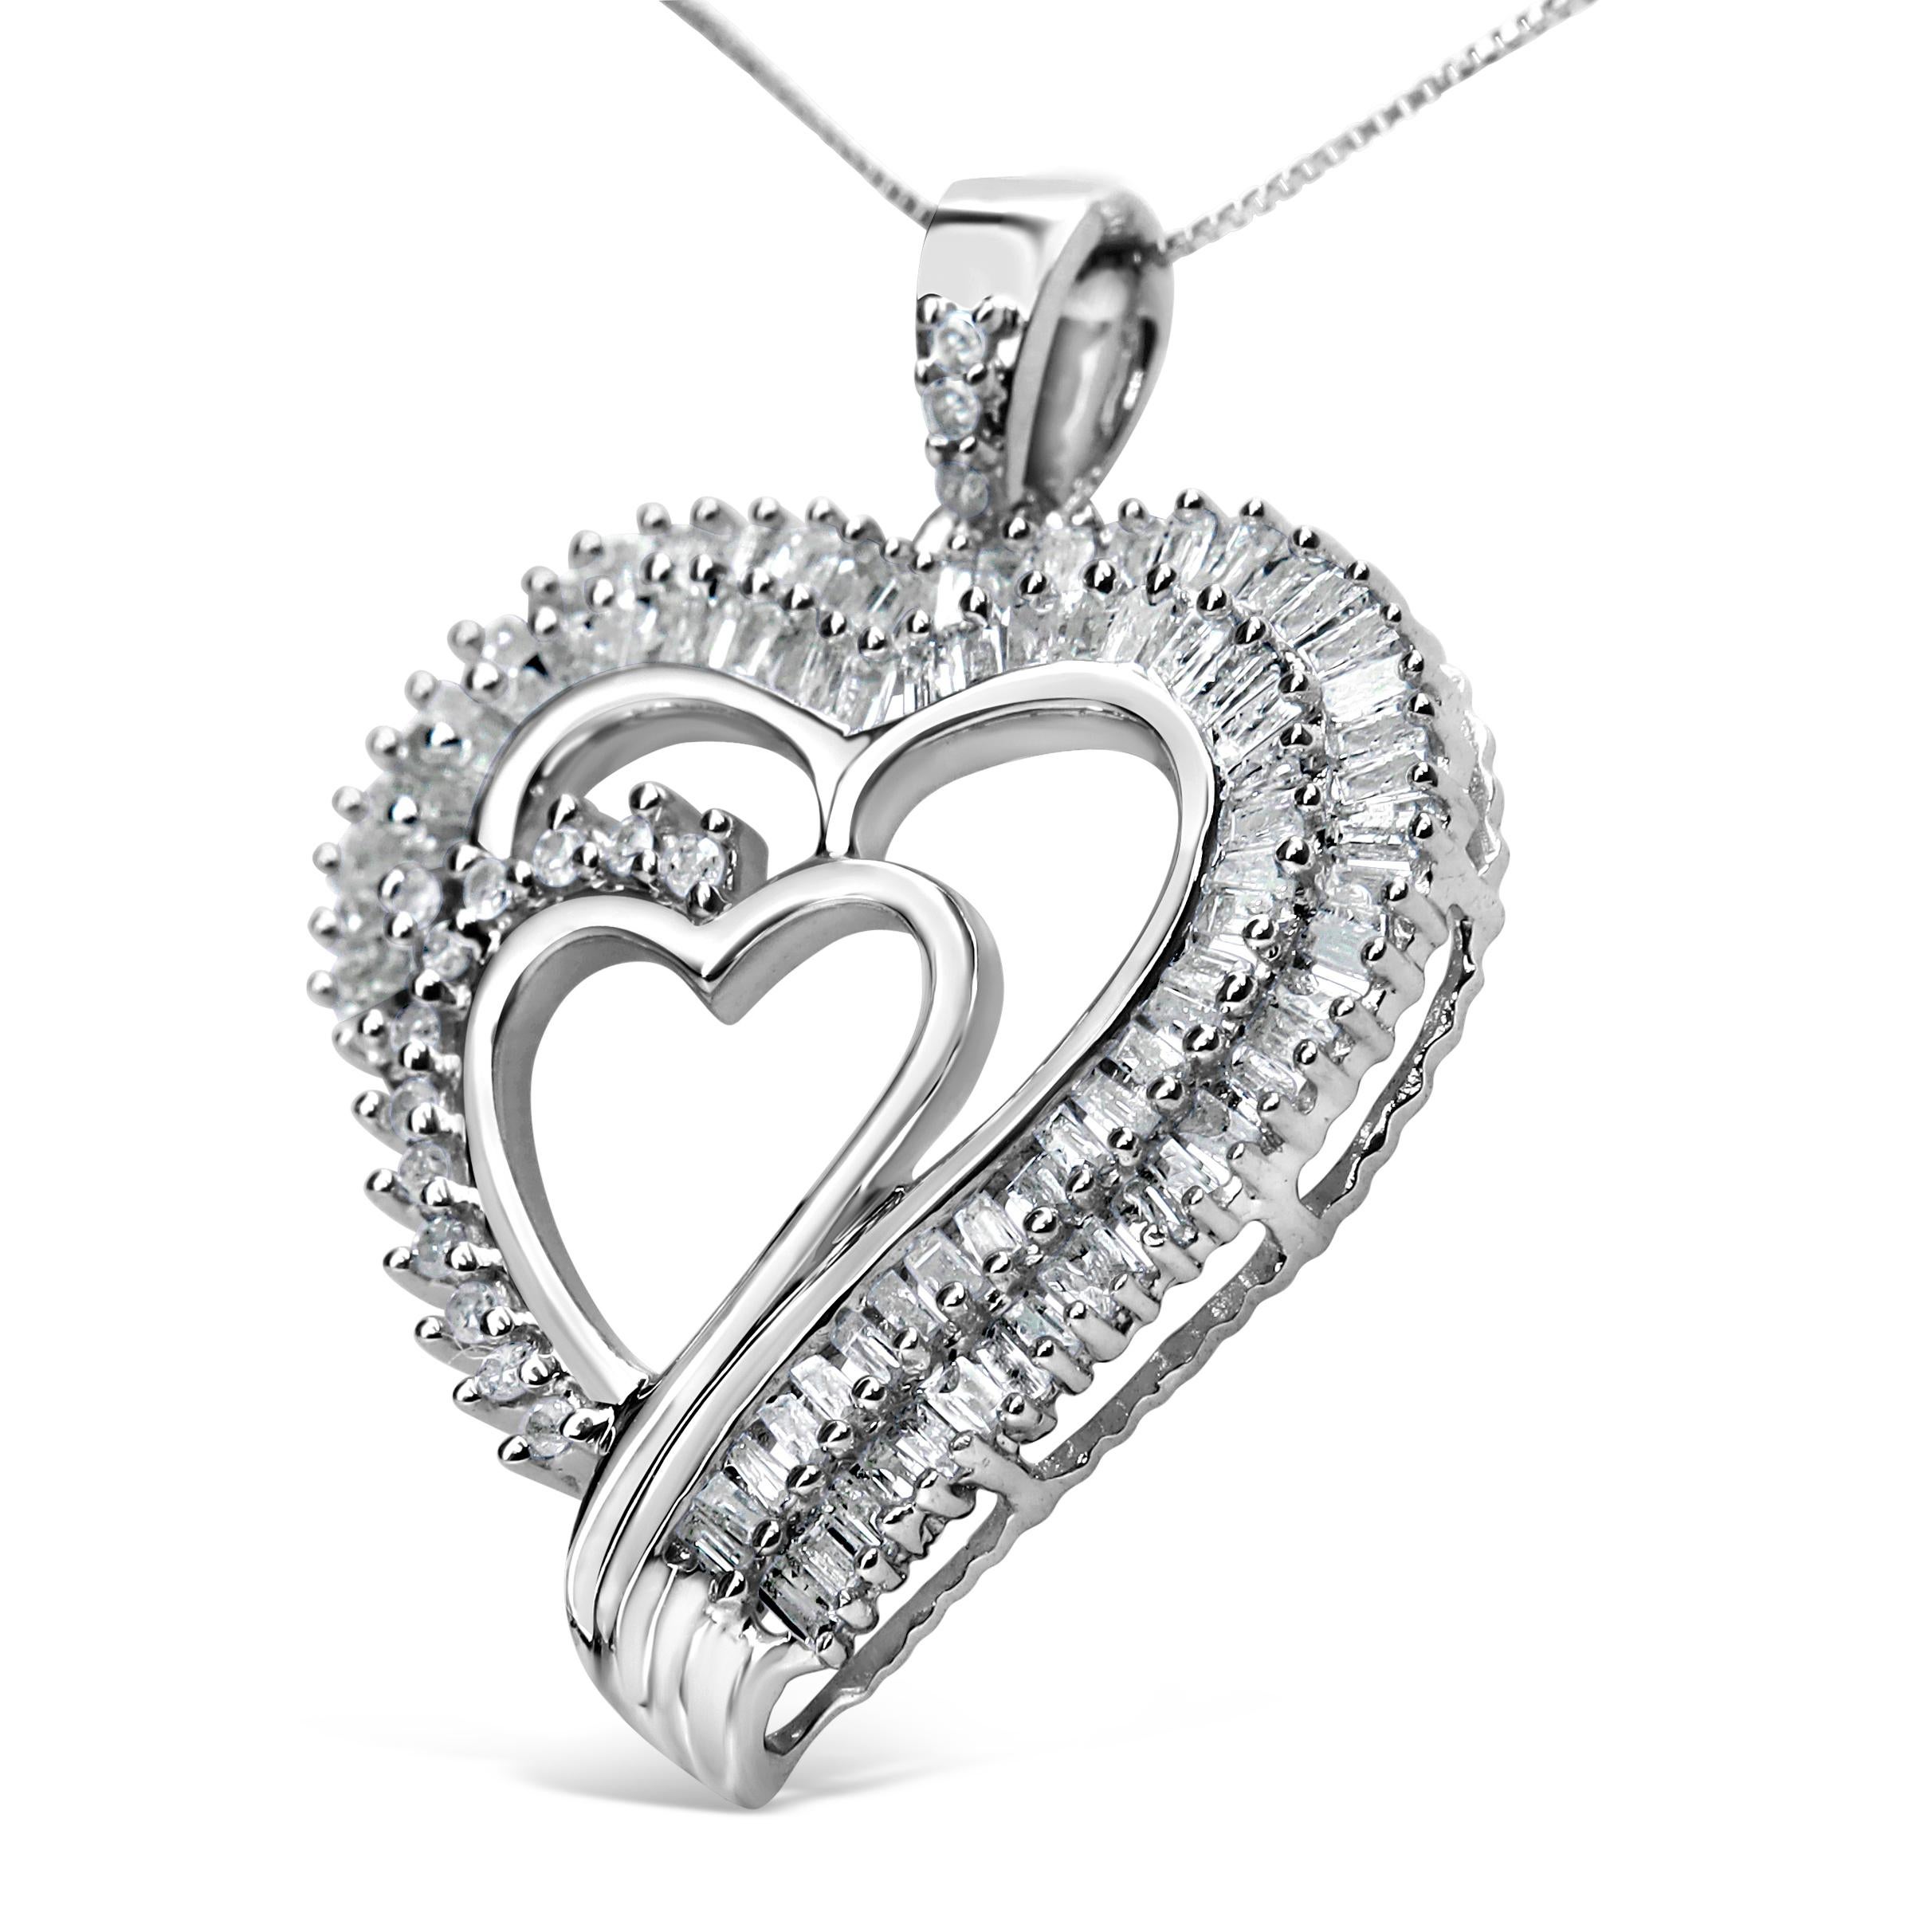 This lovely diamond pendant necklace displays a double heart motif with each of the hearts studded with shimmering diamonds for a sparkle that outshines the rest. Baguette diamonds in a channel setting adorn the outer heart and round diamonds in a